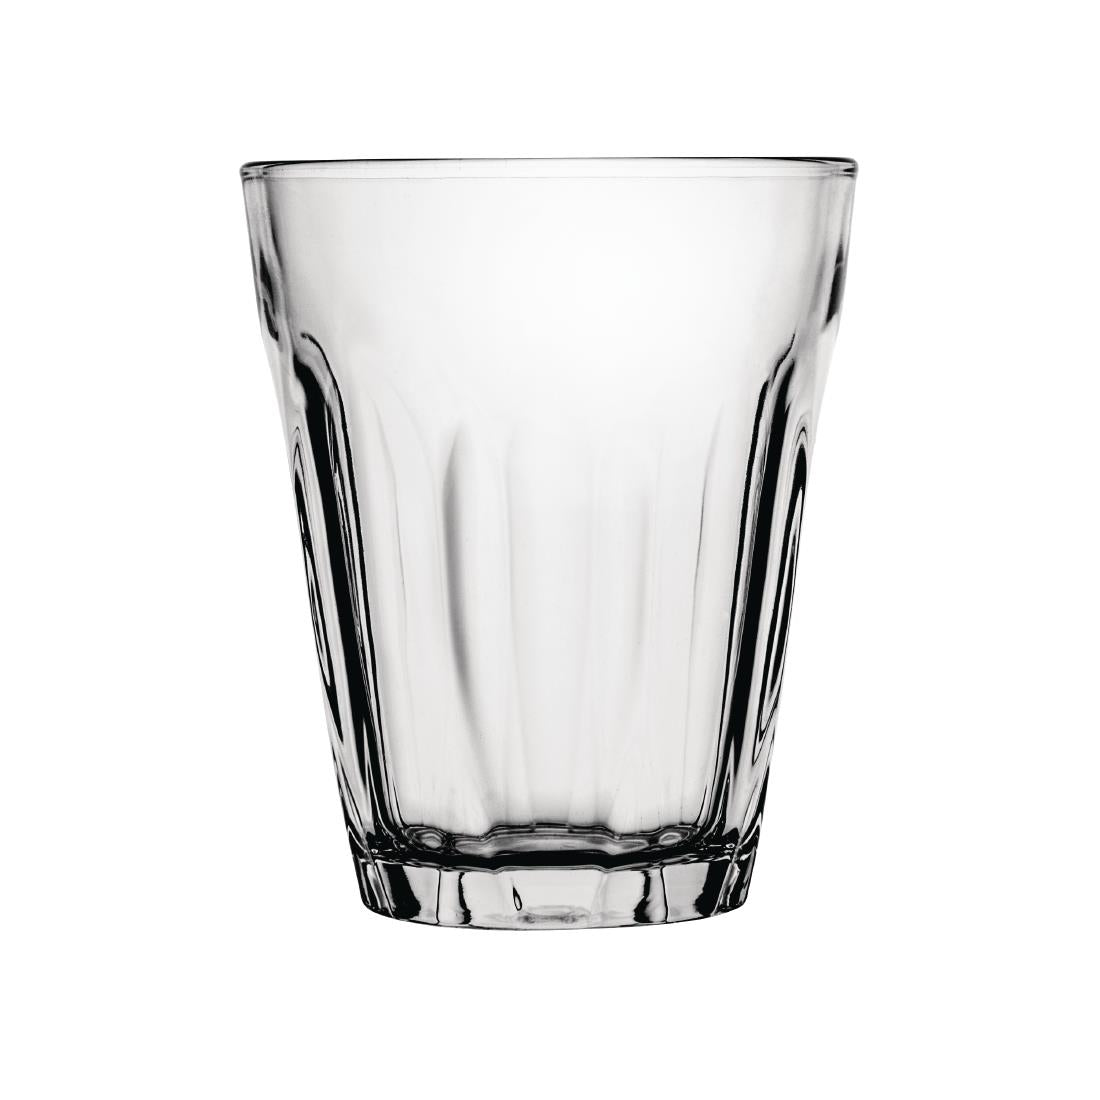 DB949 Olympia Toughened Tumbler Glasses 350ml 12oz (Pack of 12) JD Catering Equipment Solutions Ltd